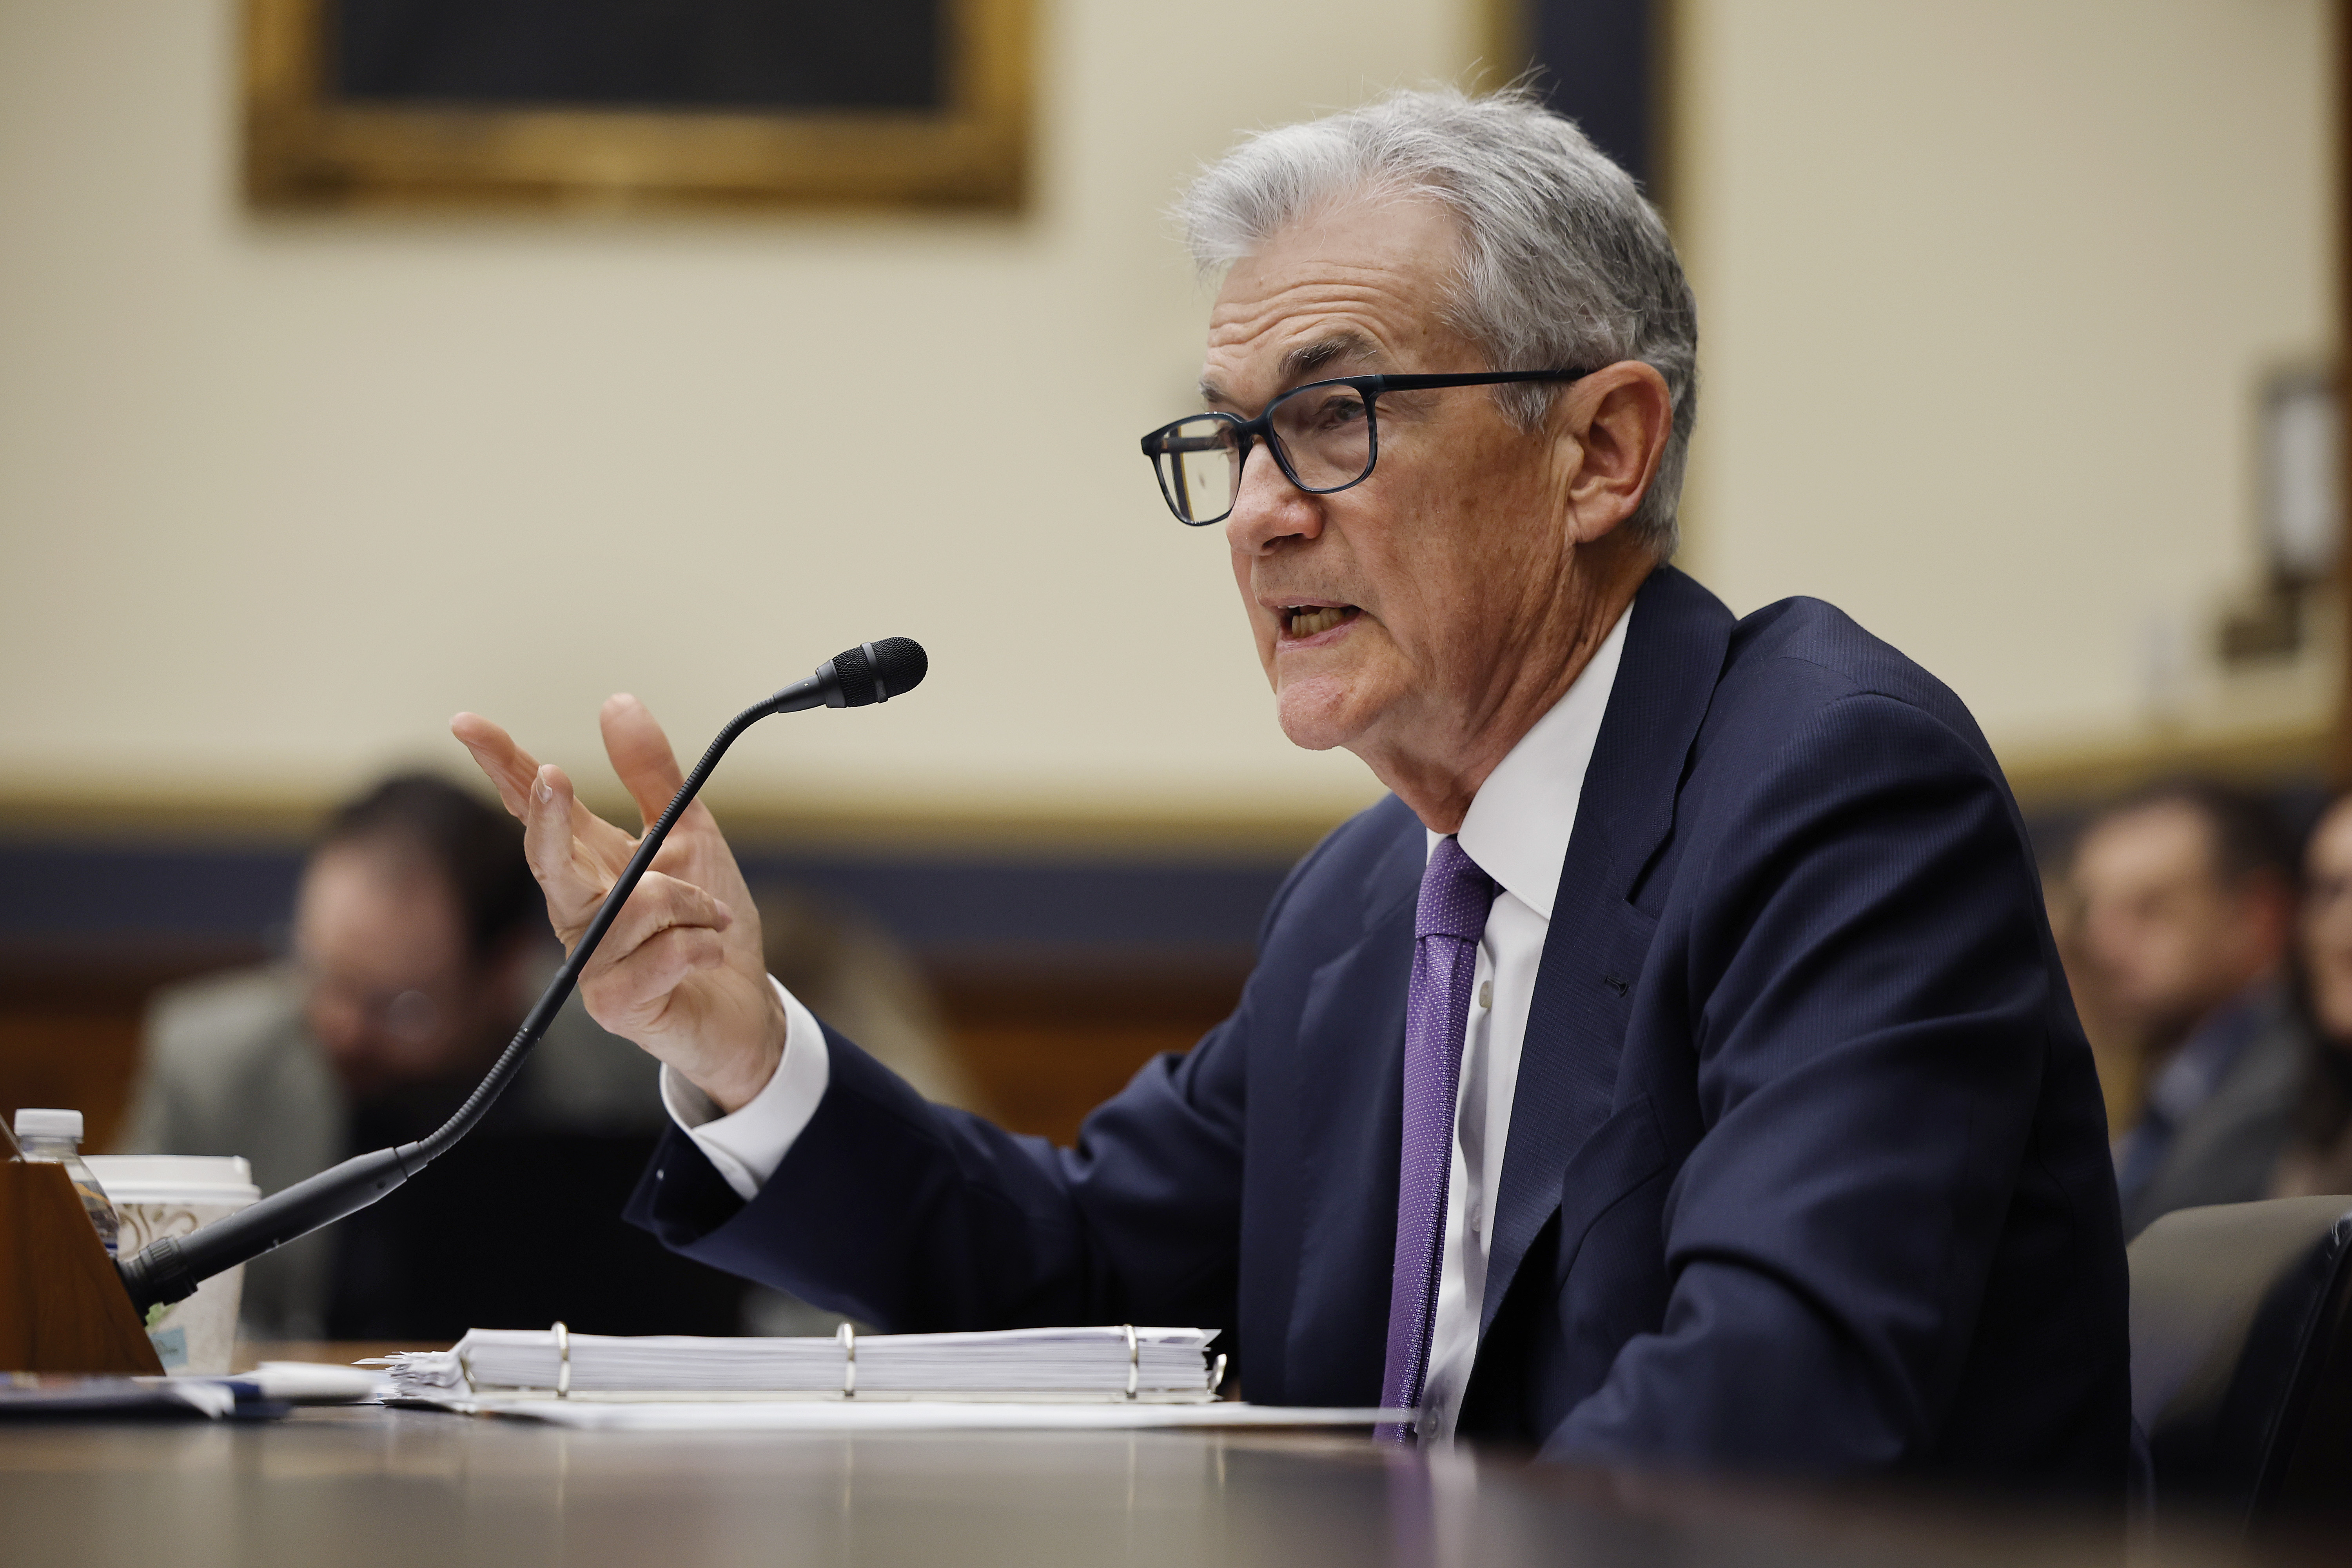 Federal Reserve Chair Jerome Powell testifies before the House Financial Services Committee in Washington, DC, on March 6.